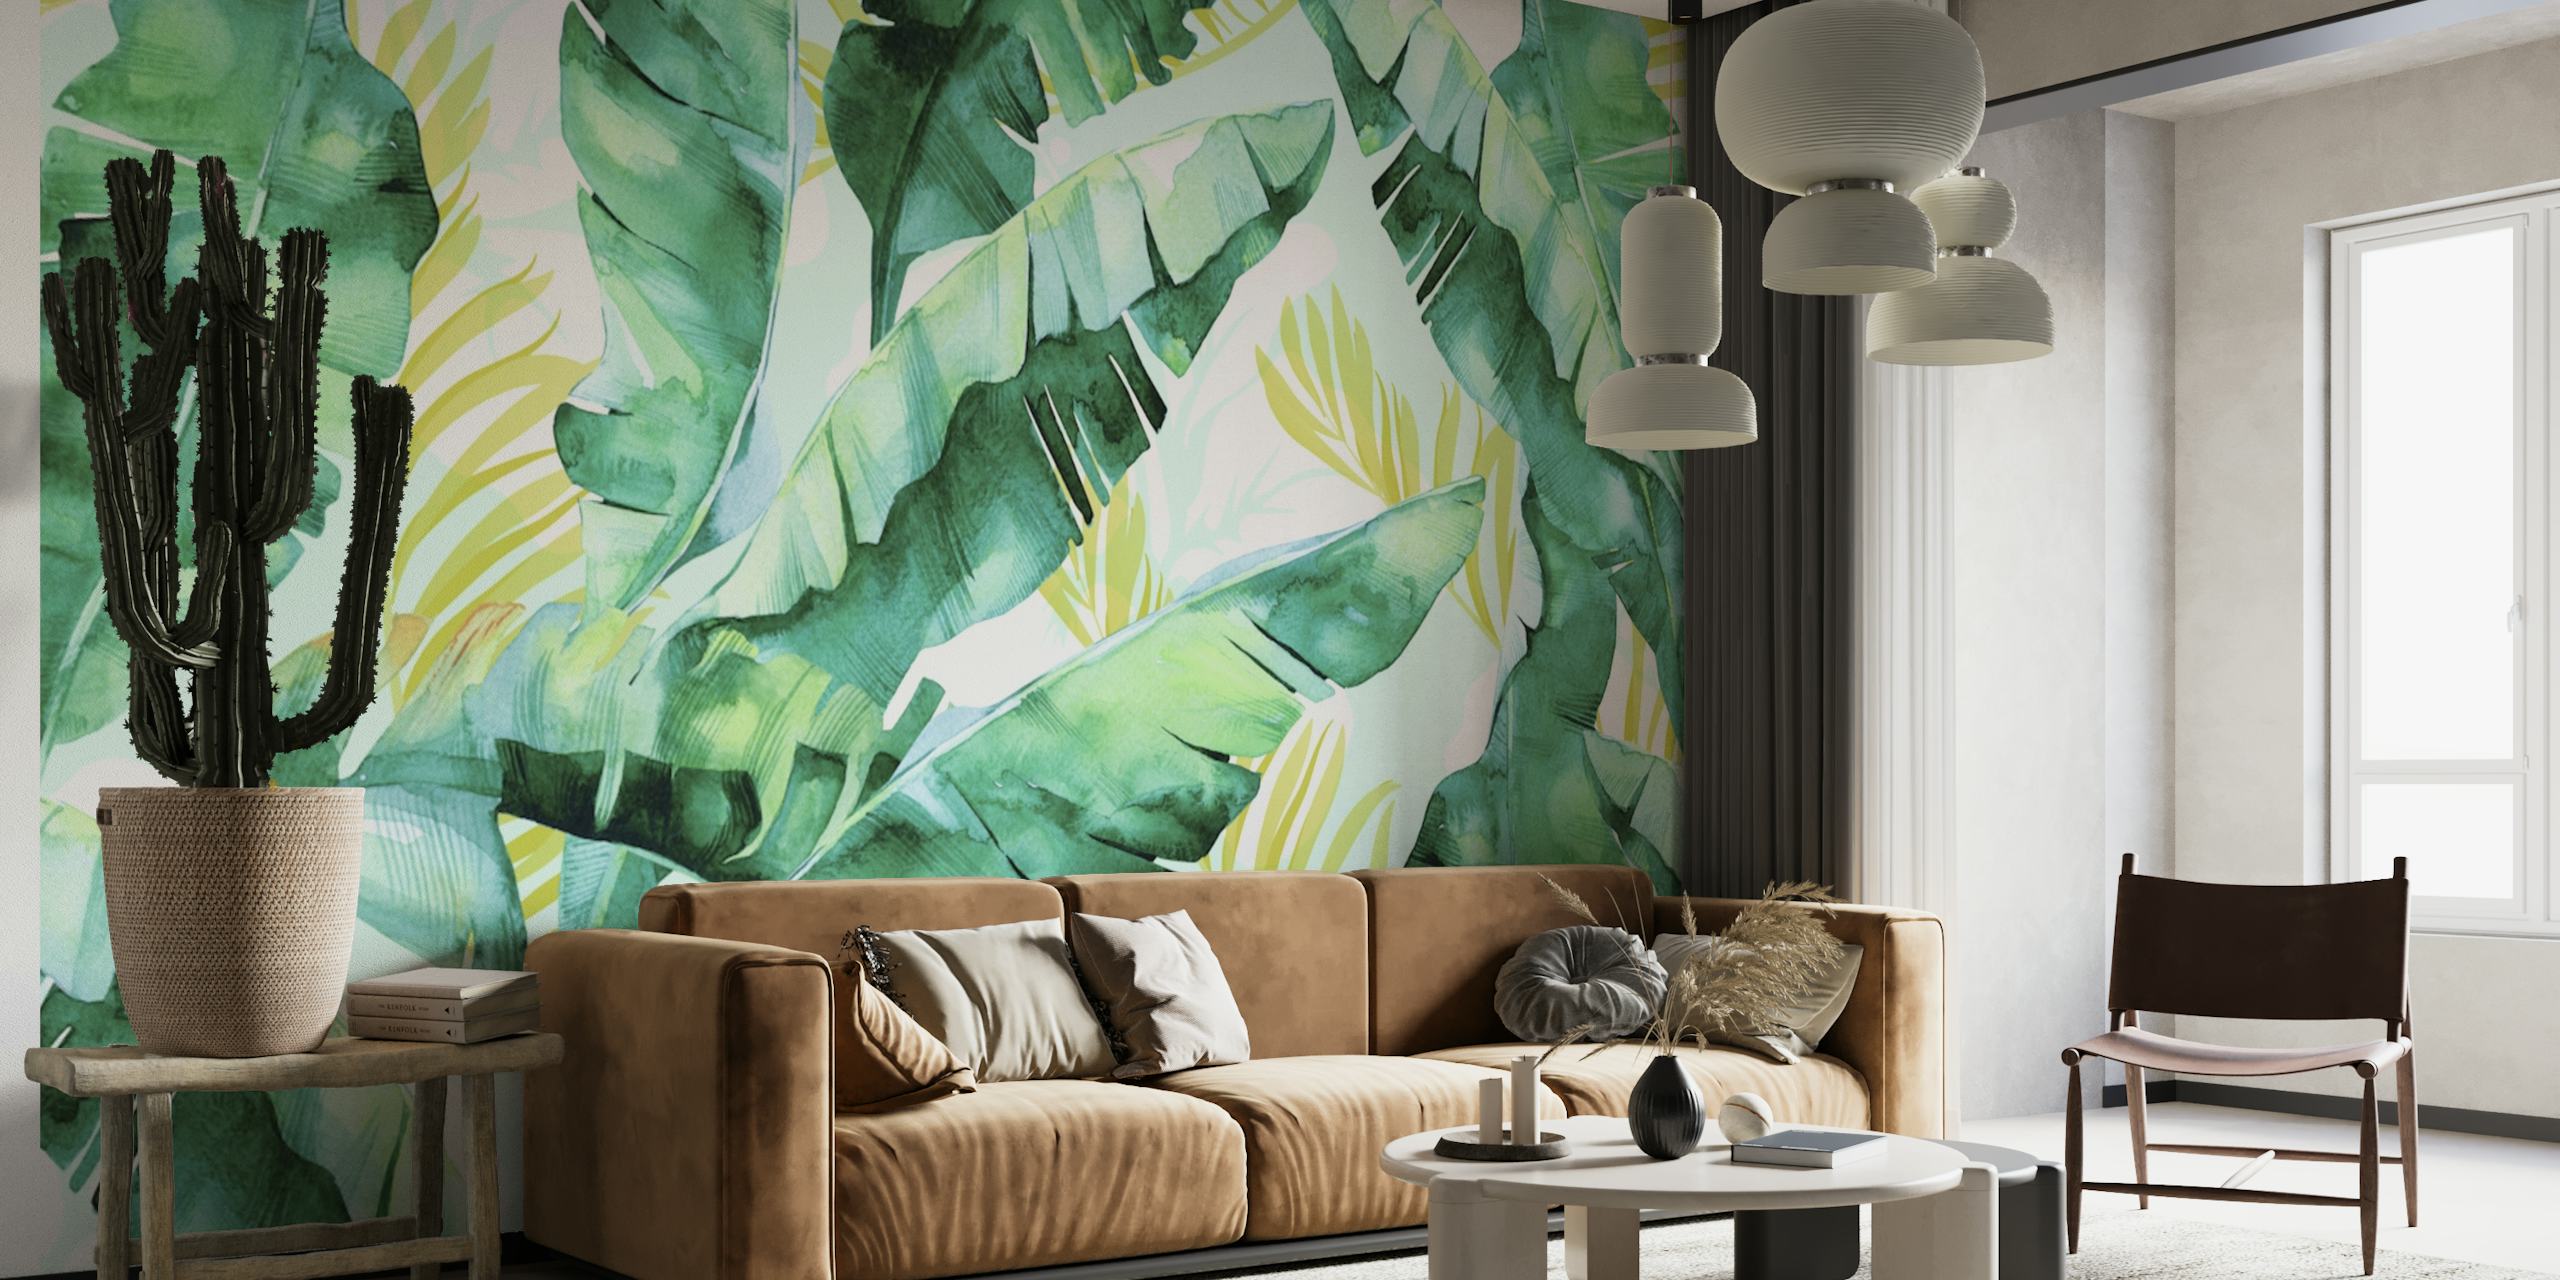 Elegant watercolor banana leaf wall mural with green tones and gold accents